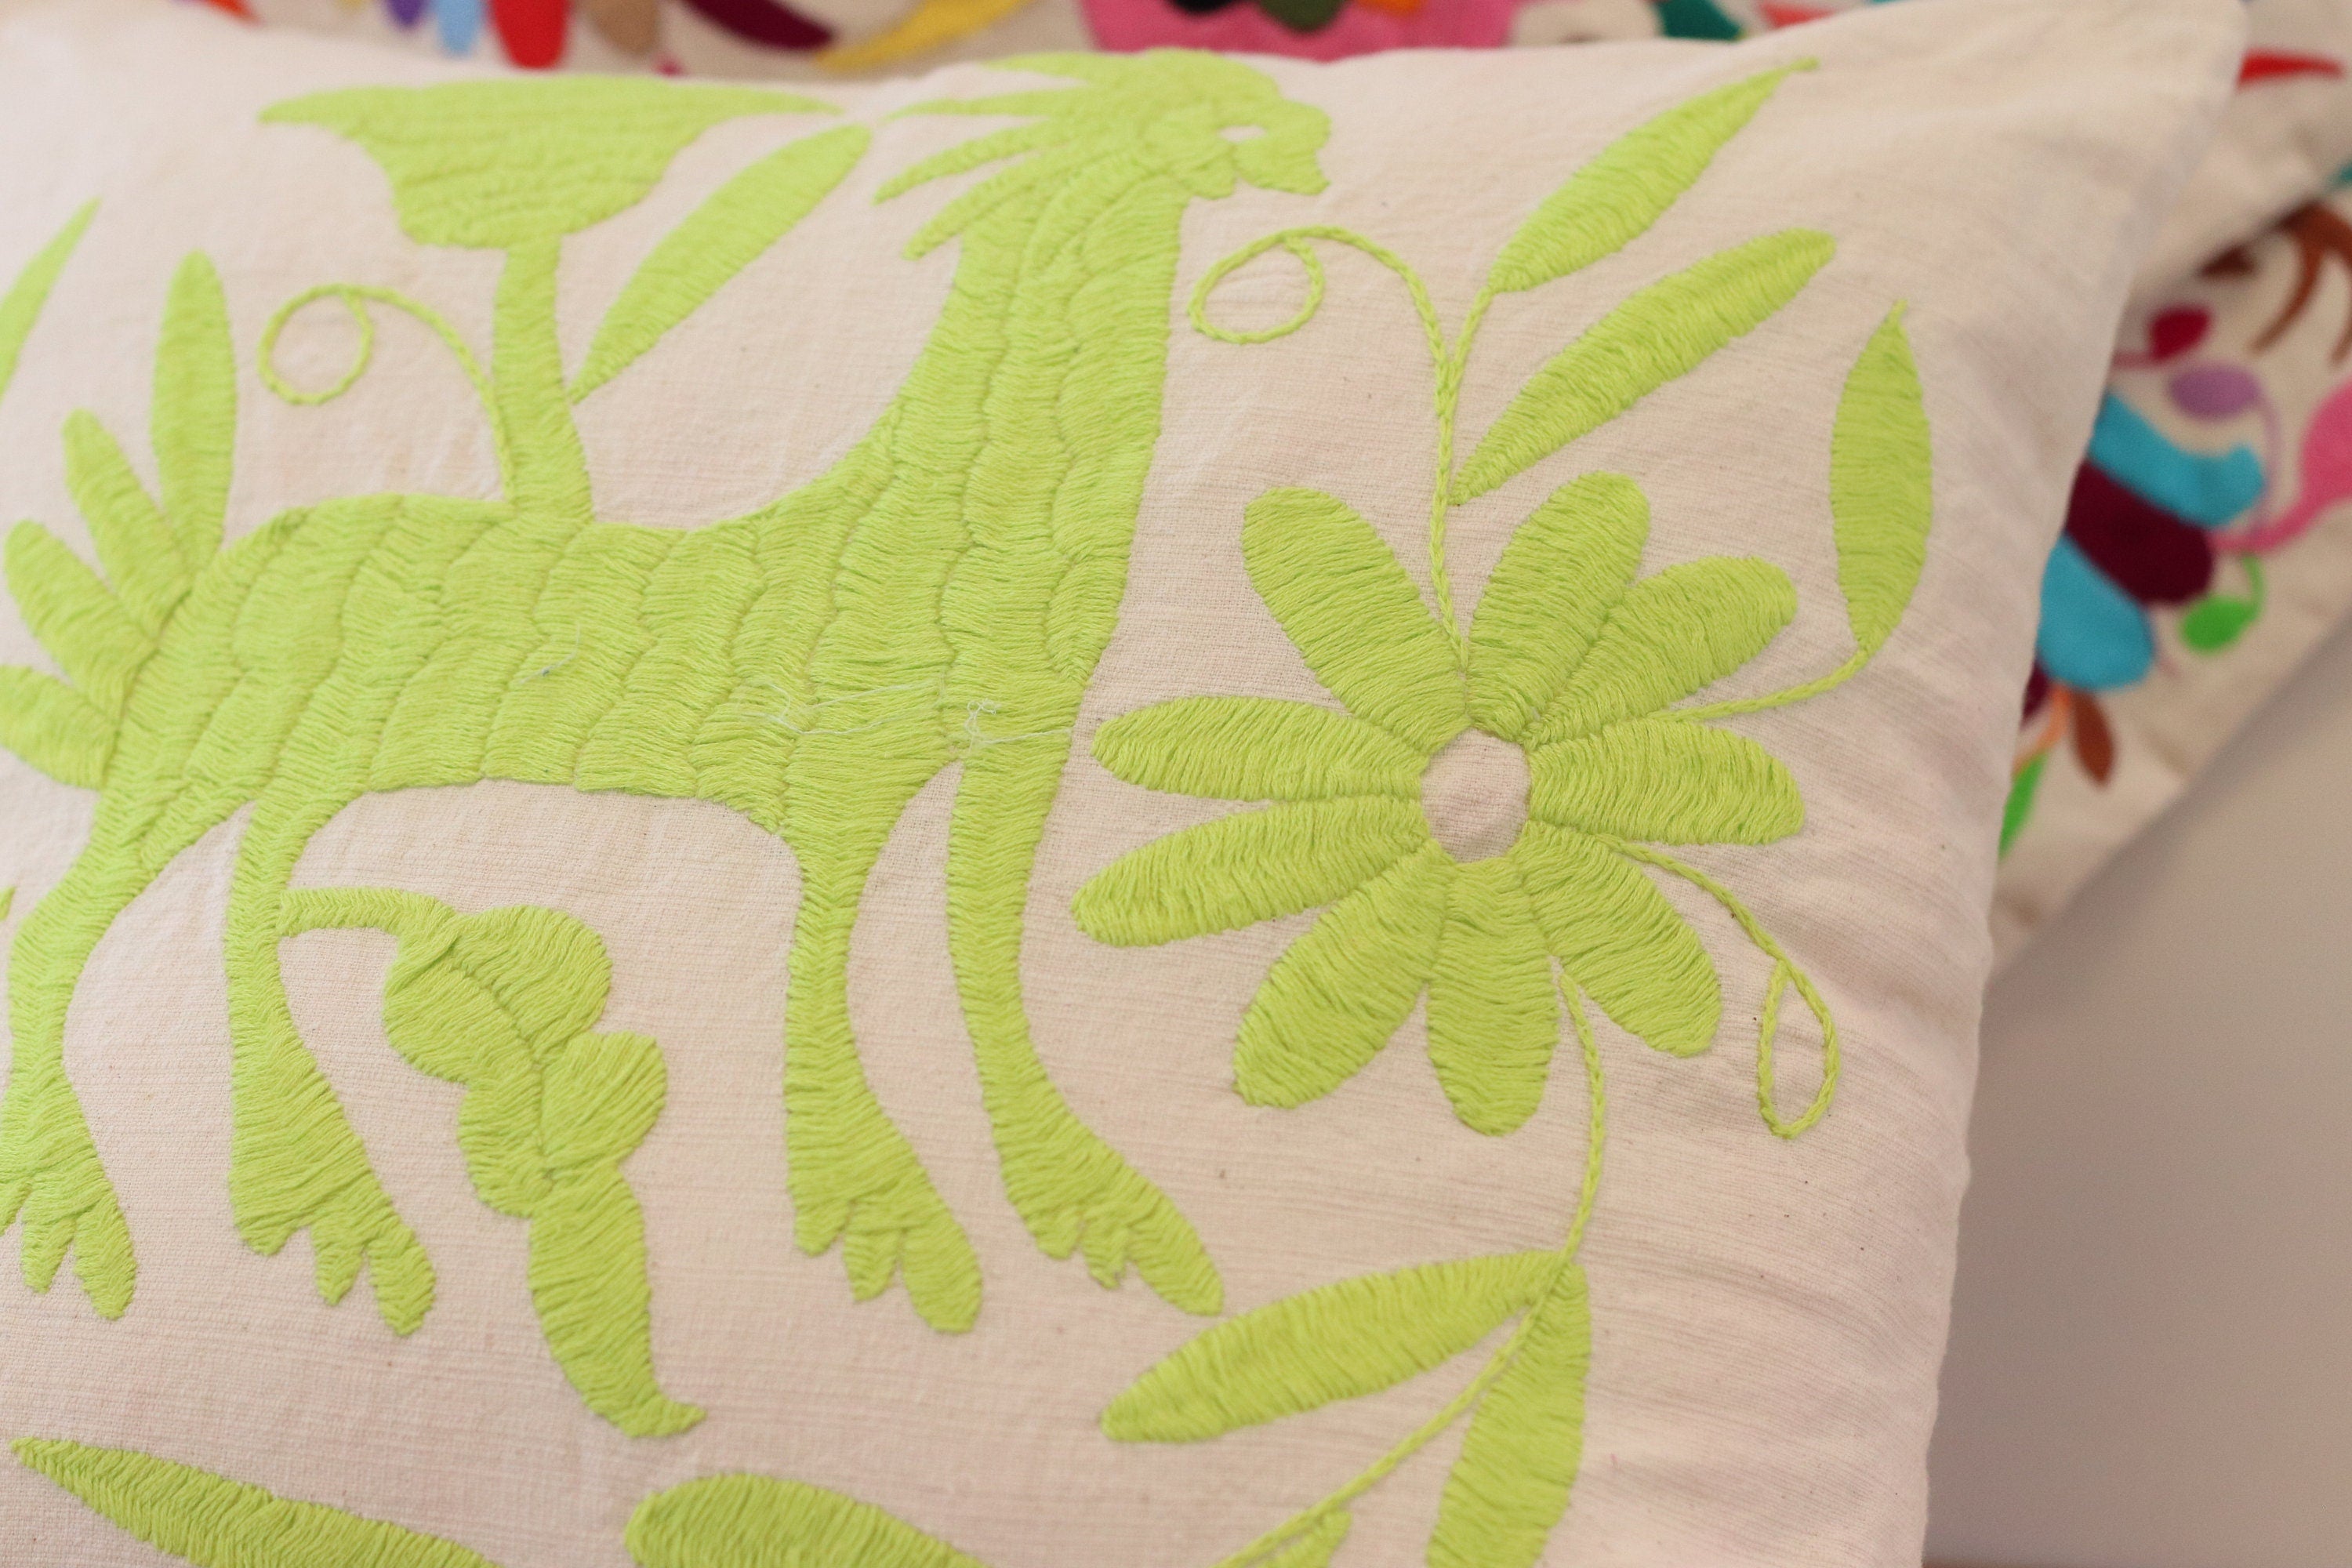 Bright Green Flower and Animal Hand Embroidered Pillow Cover on White Background. Handmade in Mexico. Ships from the USA. Buy now at www.felipeandgrace.com.